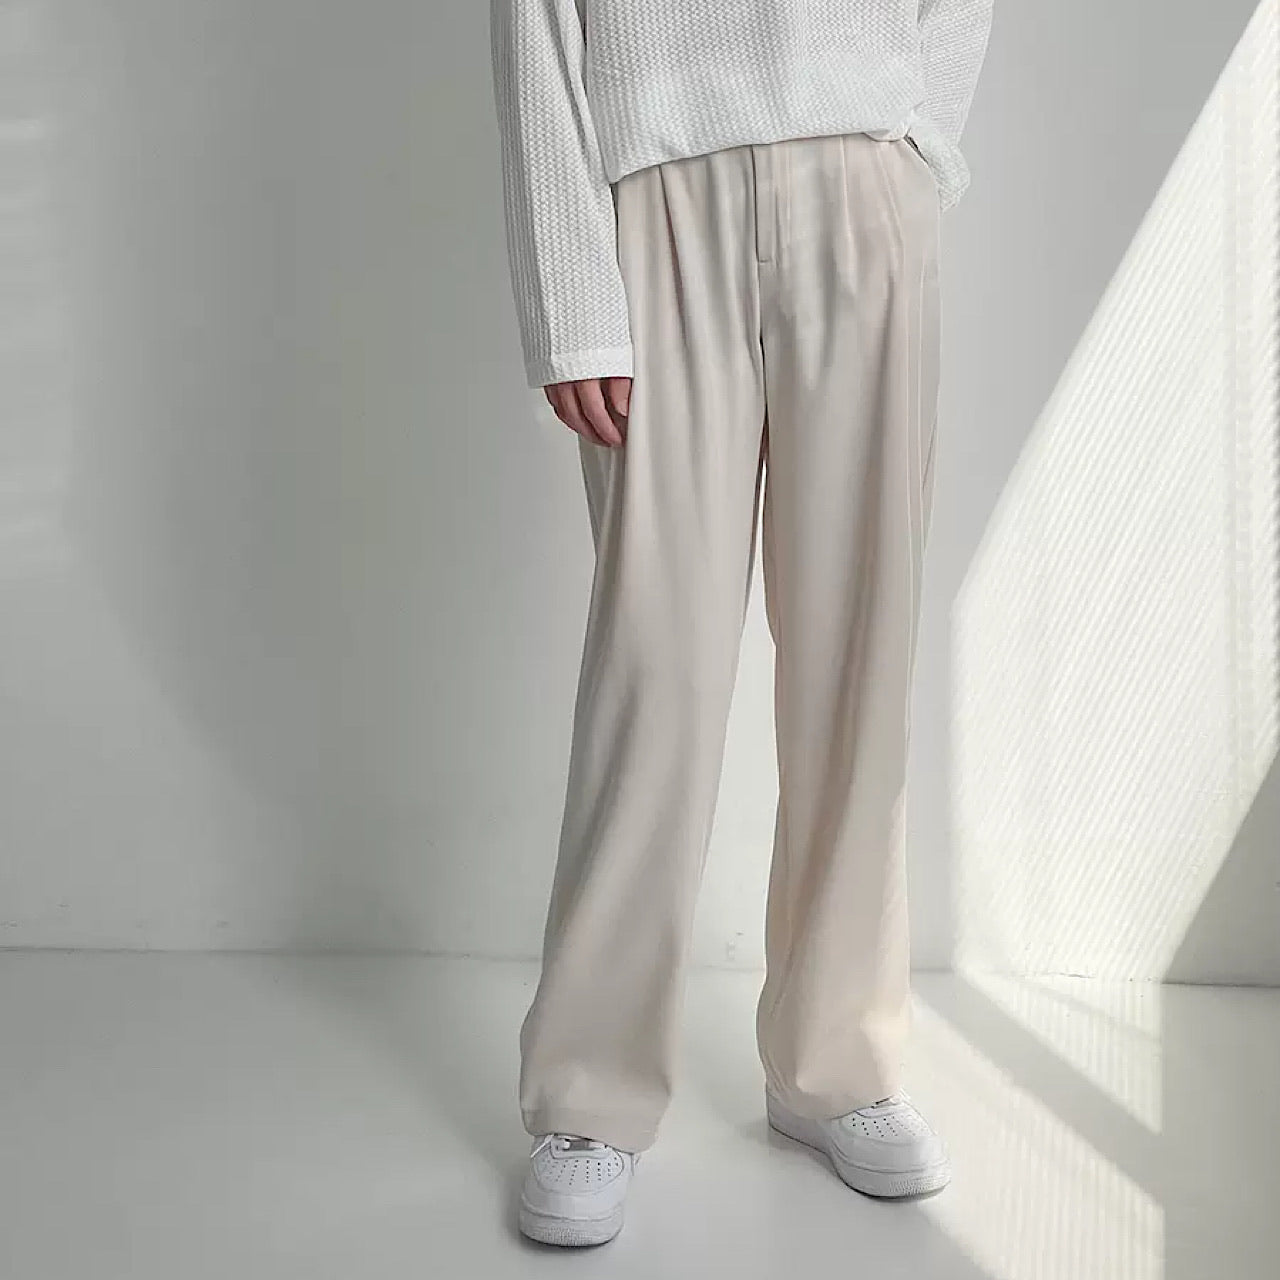 Airy stretch wide pants  HL1334